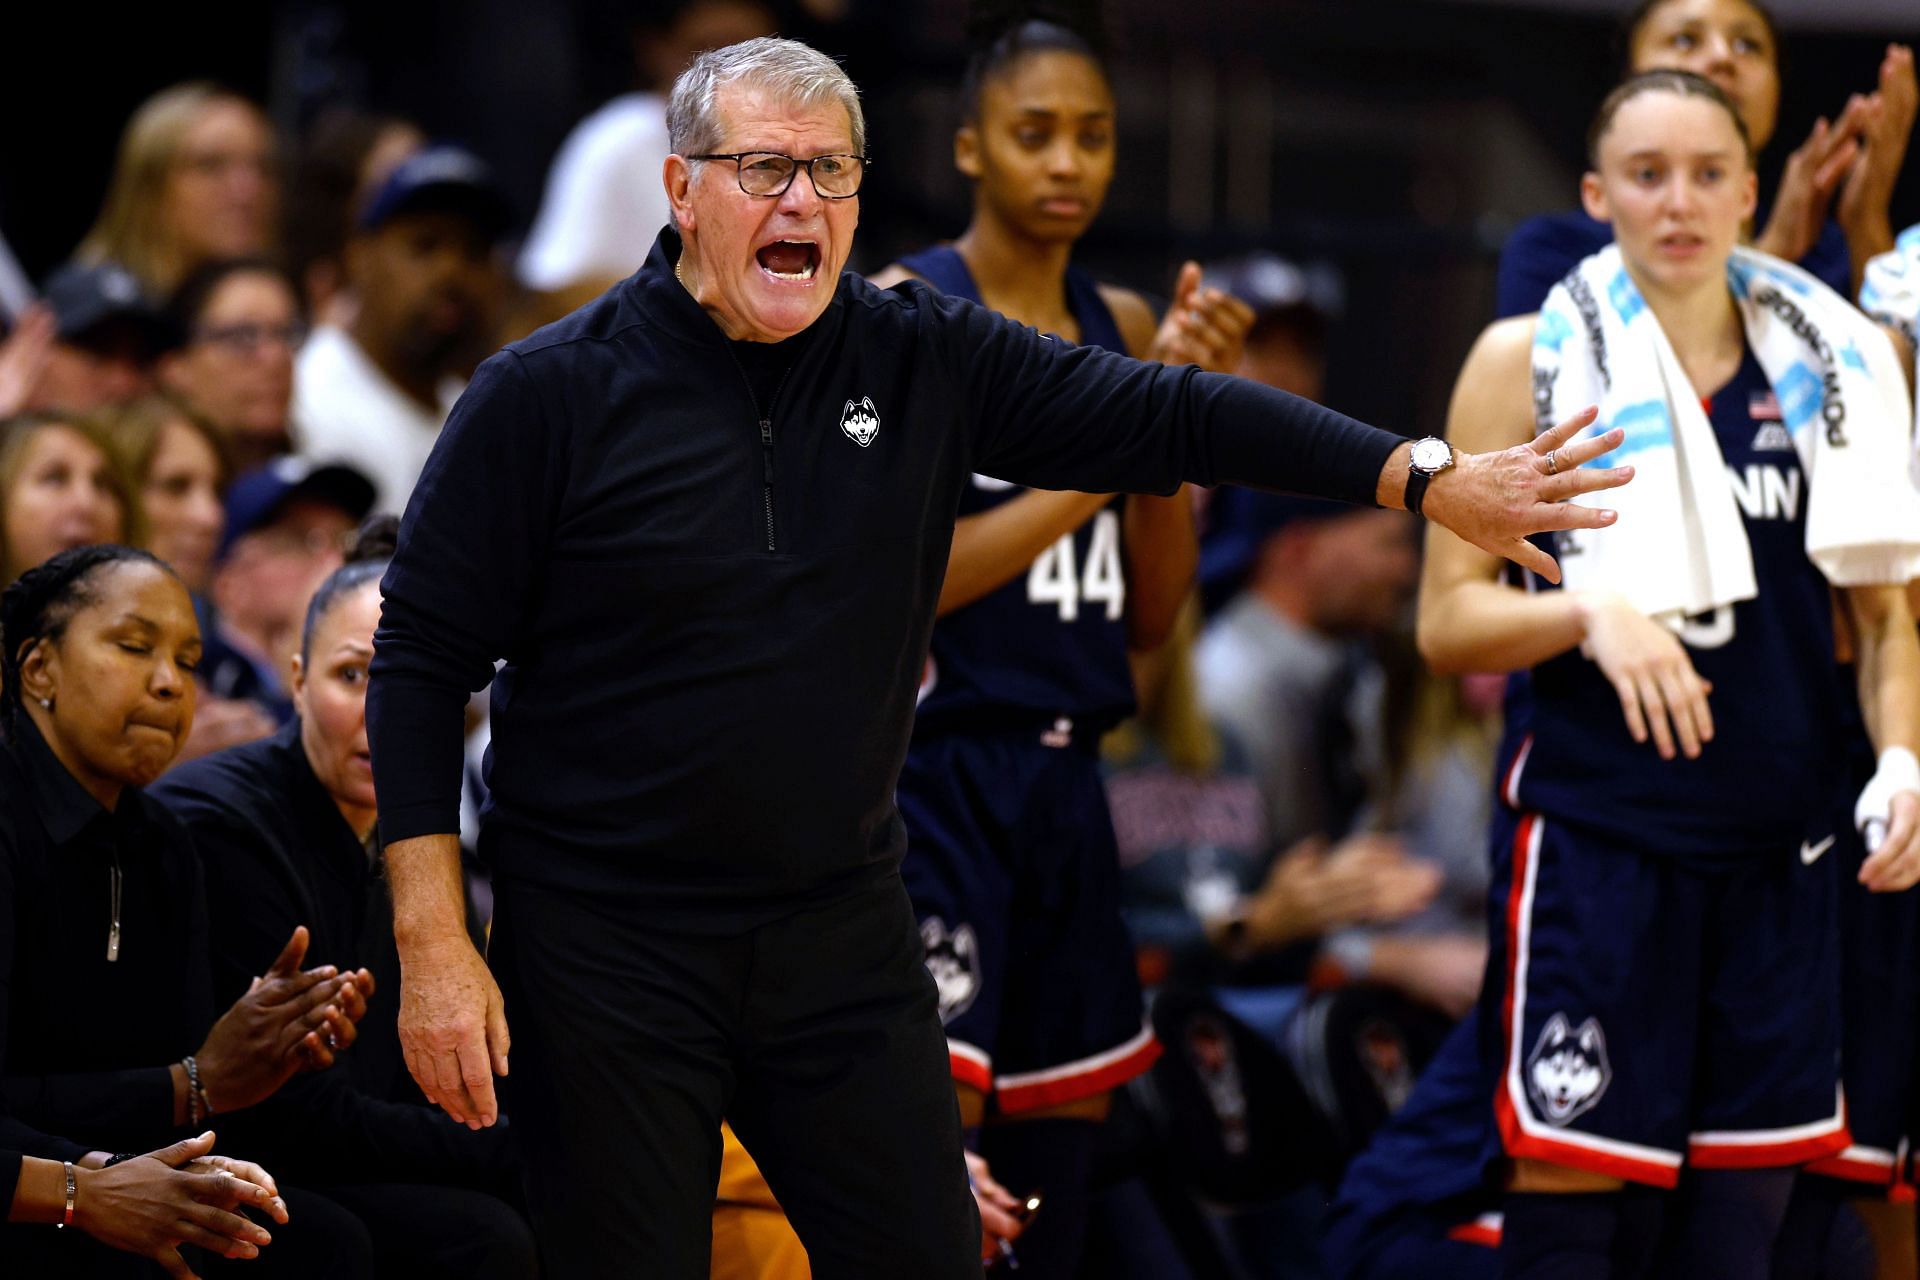 UConn women&#039;s basketball coach Geno Auriemma has 11 NCAA titles to Dan Hurley&#039;s one, but earns nearly $3 million per year, while Hurley tops the $5 million mark.